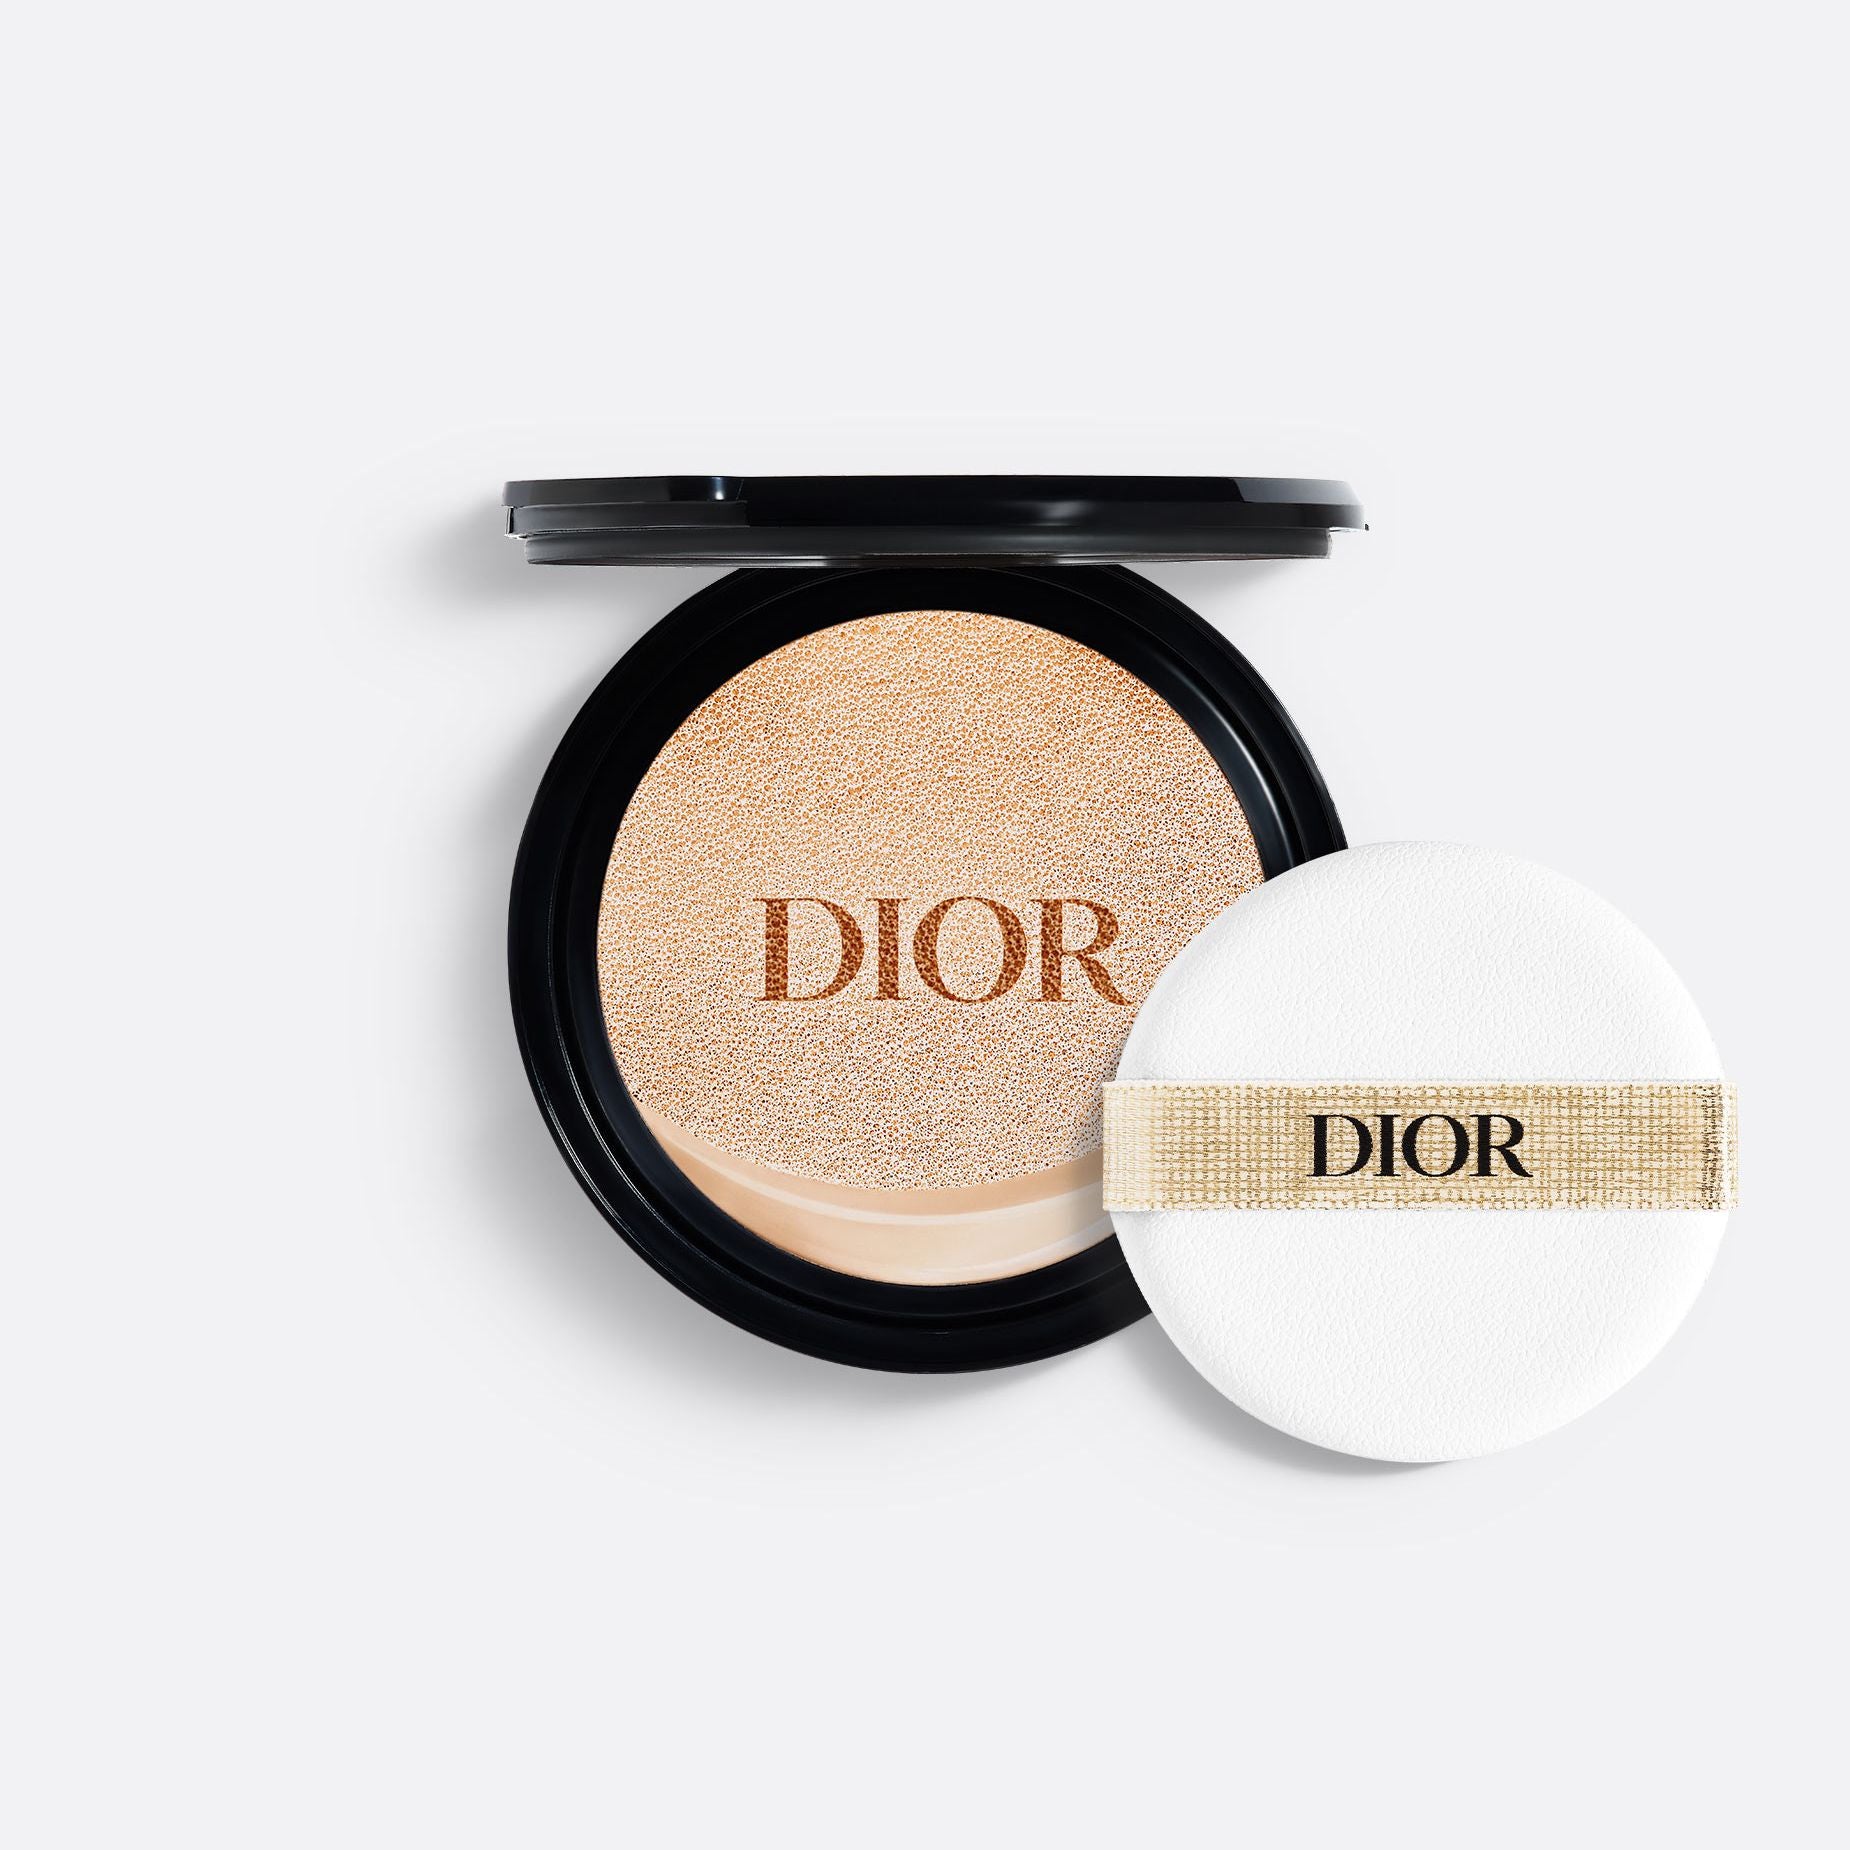 DIOR PRESTIGE LE CUSHION TEINT DE ROSE REFILL ~ Exceptional Anti-Aging Foundation Refill - High Perfection and Smoothing - SPF 50 PA+++